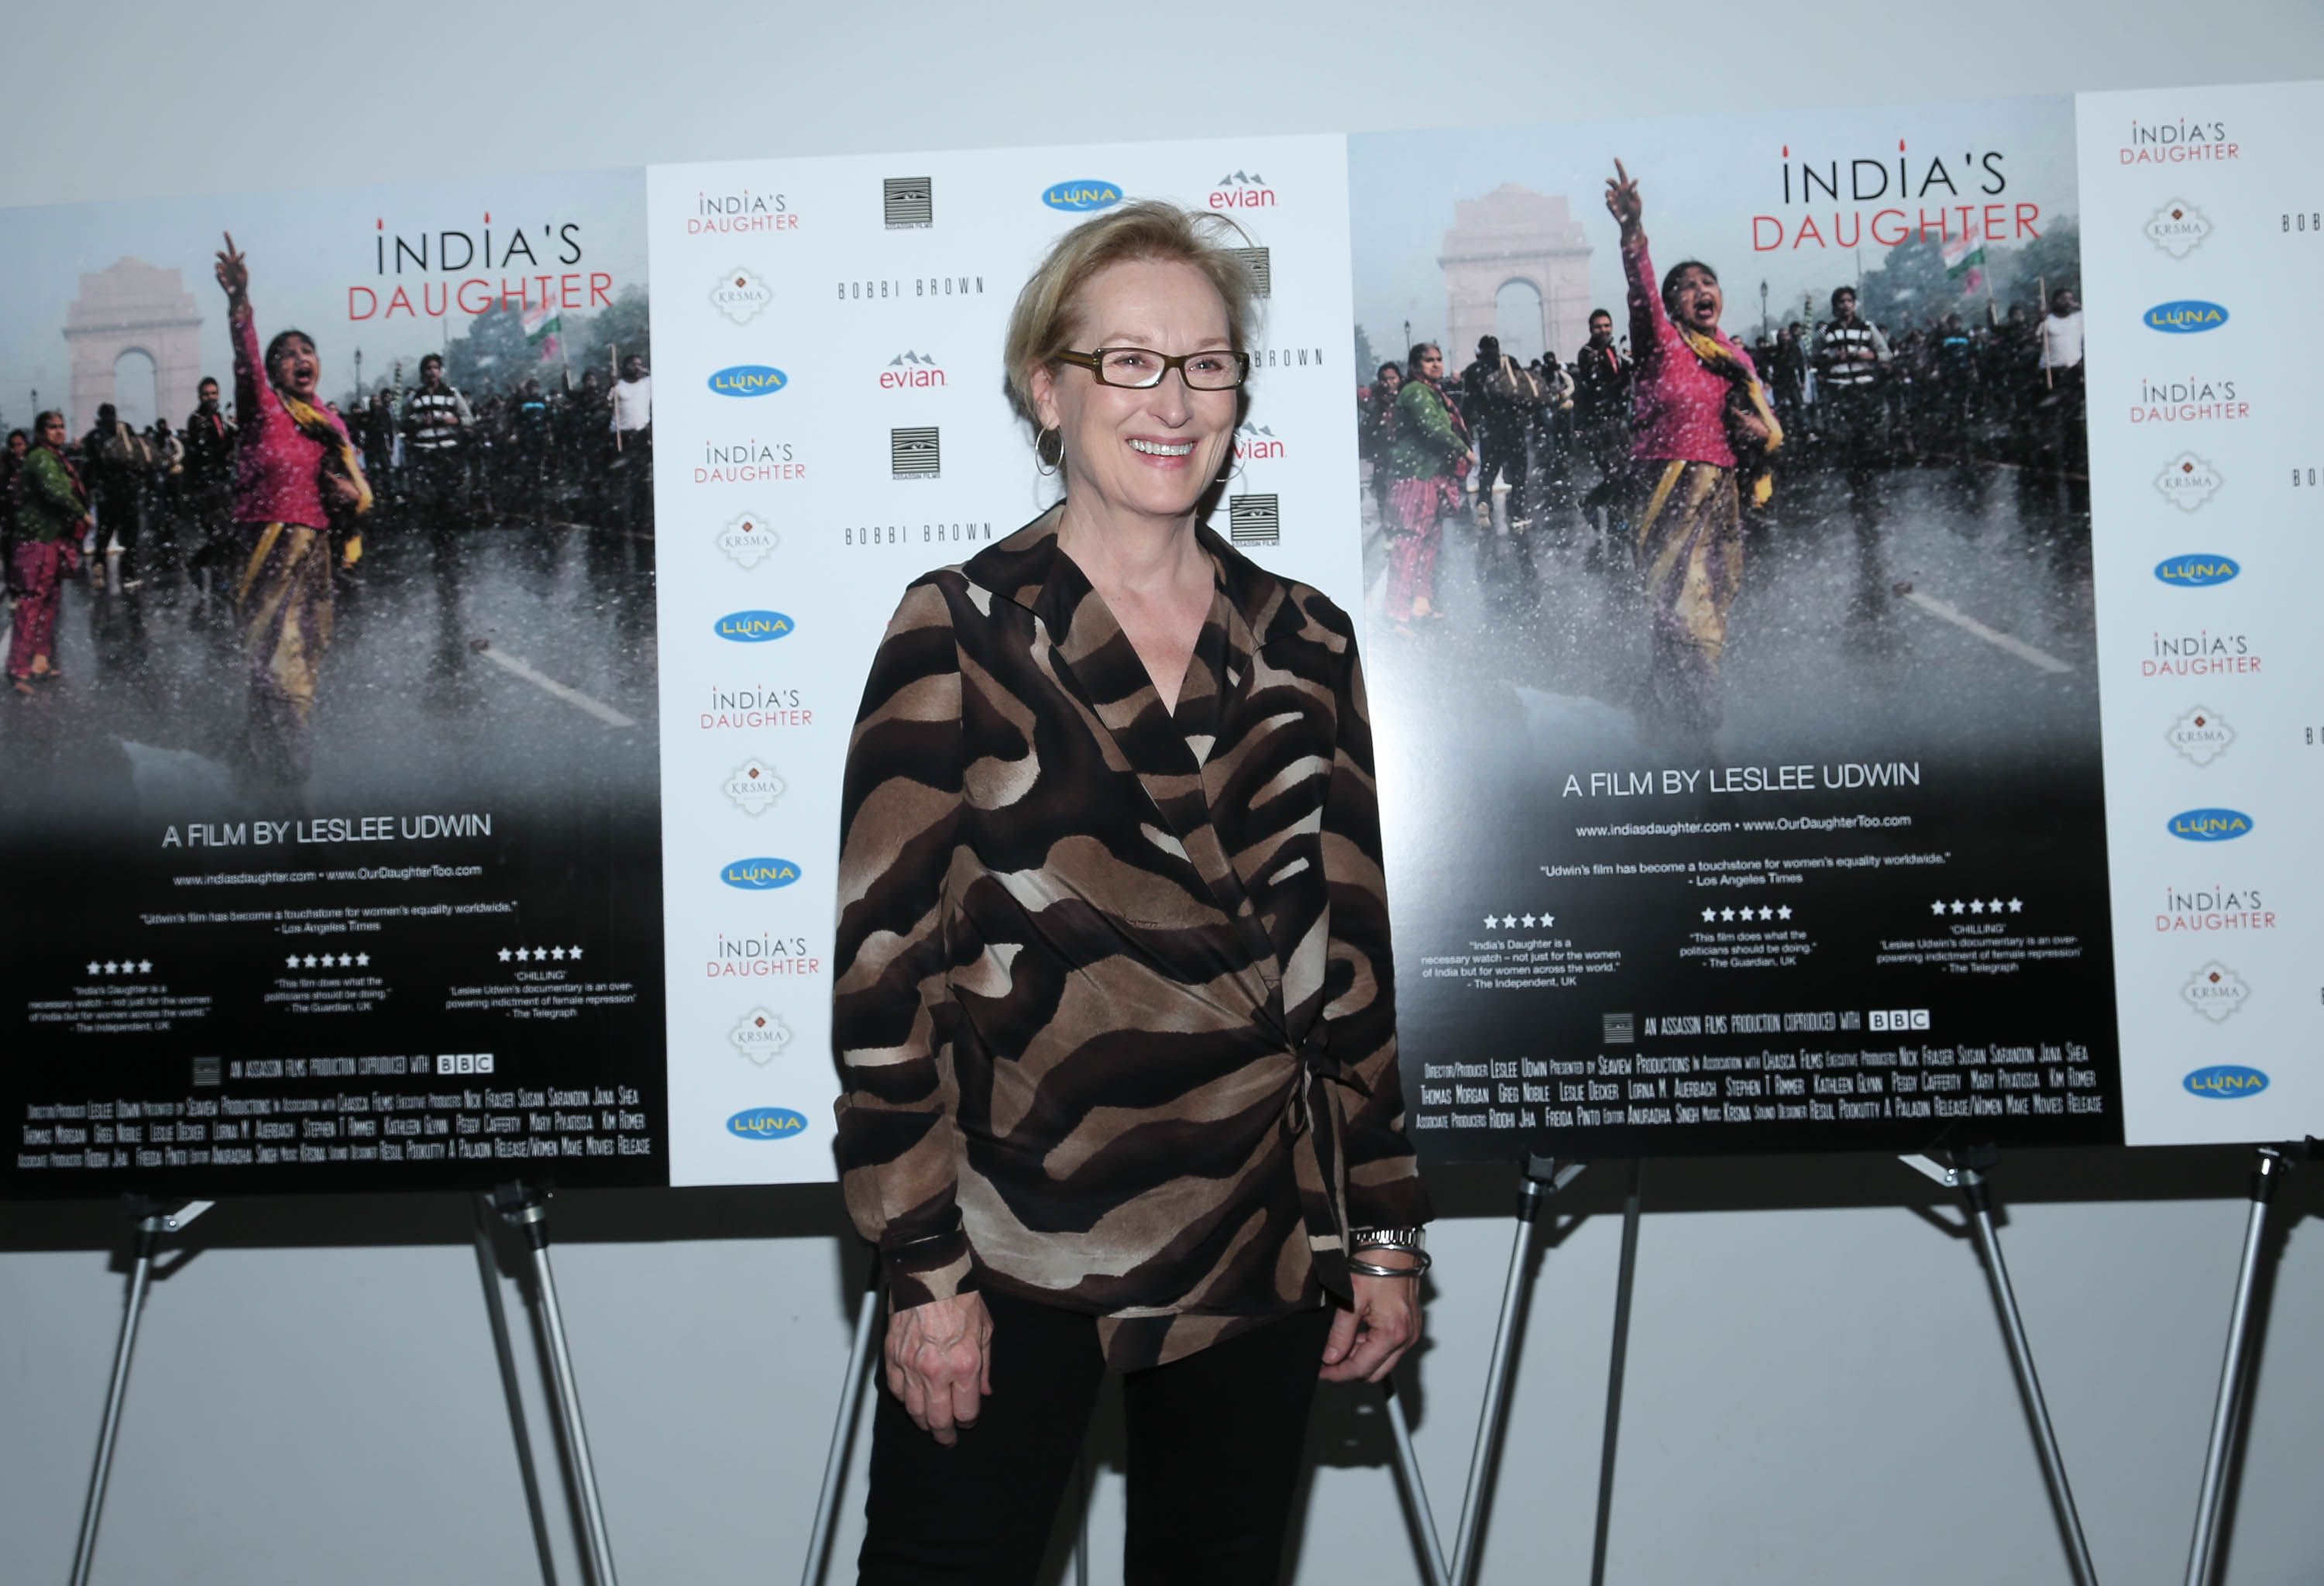 NEW YORK, NY - OCTOBER 14: Meryl Streep attends the New York Premiere of "India's Daughter" at NYIT Auditorium on October 14, 2015 in New York City. Rob Kim/Getty Images/AFP == FOR NEWSPAPERS, INTERNET, TELCOS & TELEVISION USE ONLY ==